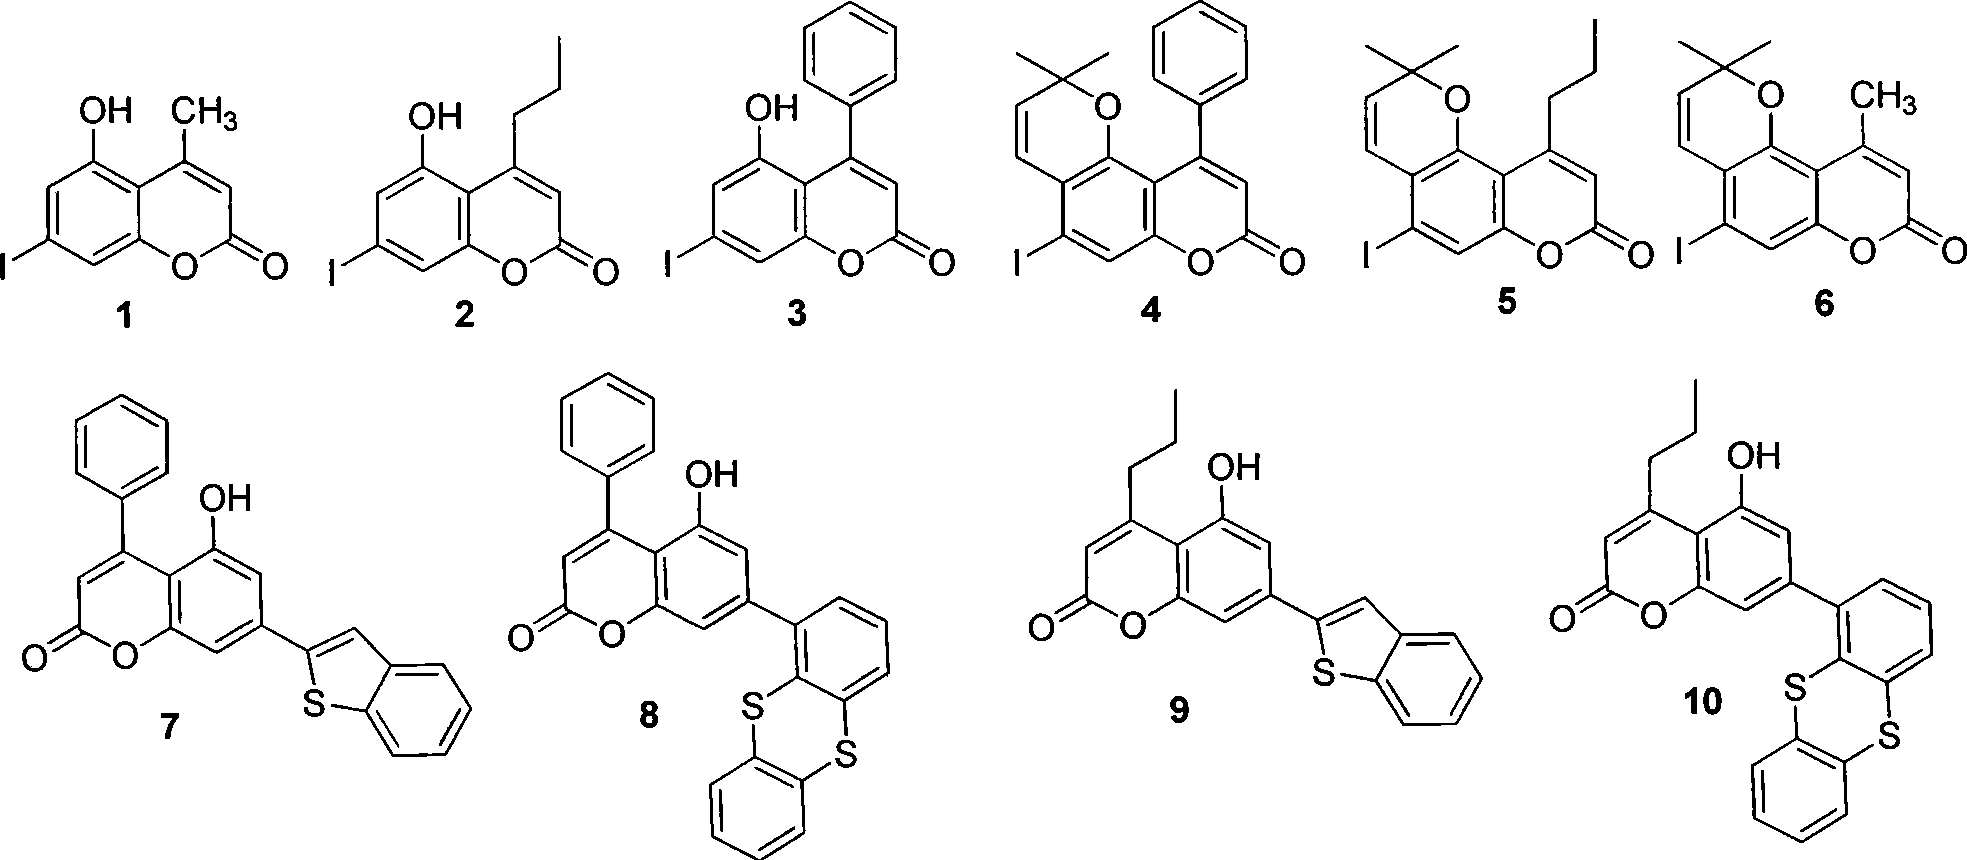 5-hydroxy coumarin and pyranoid type coumarin compounds, synthesizing method and use